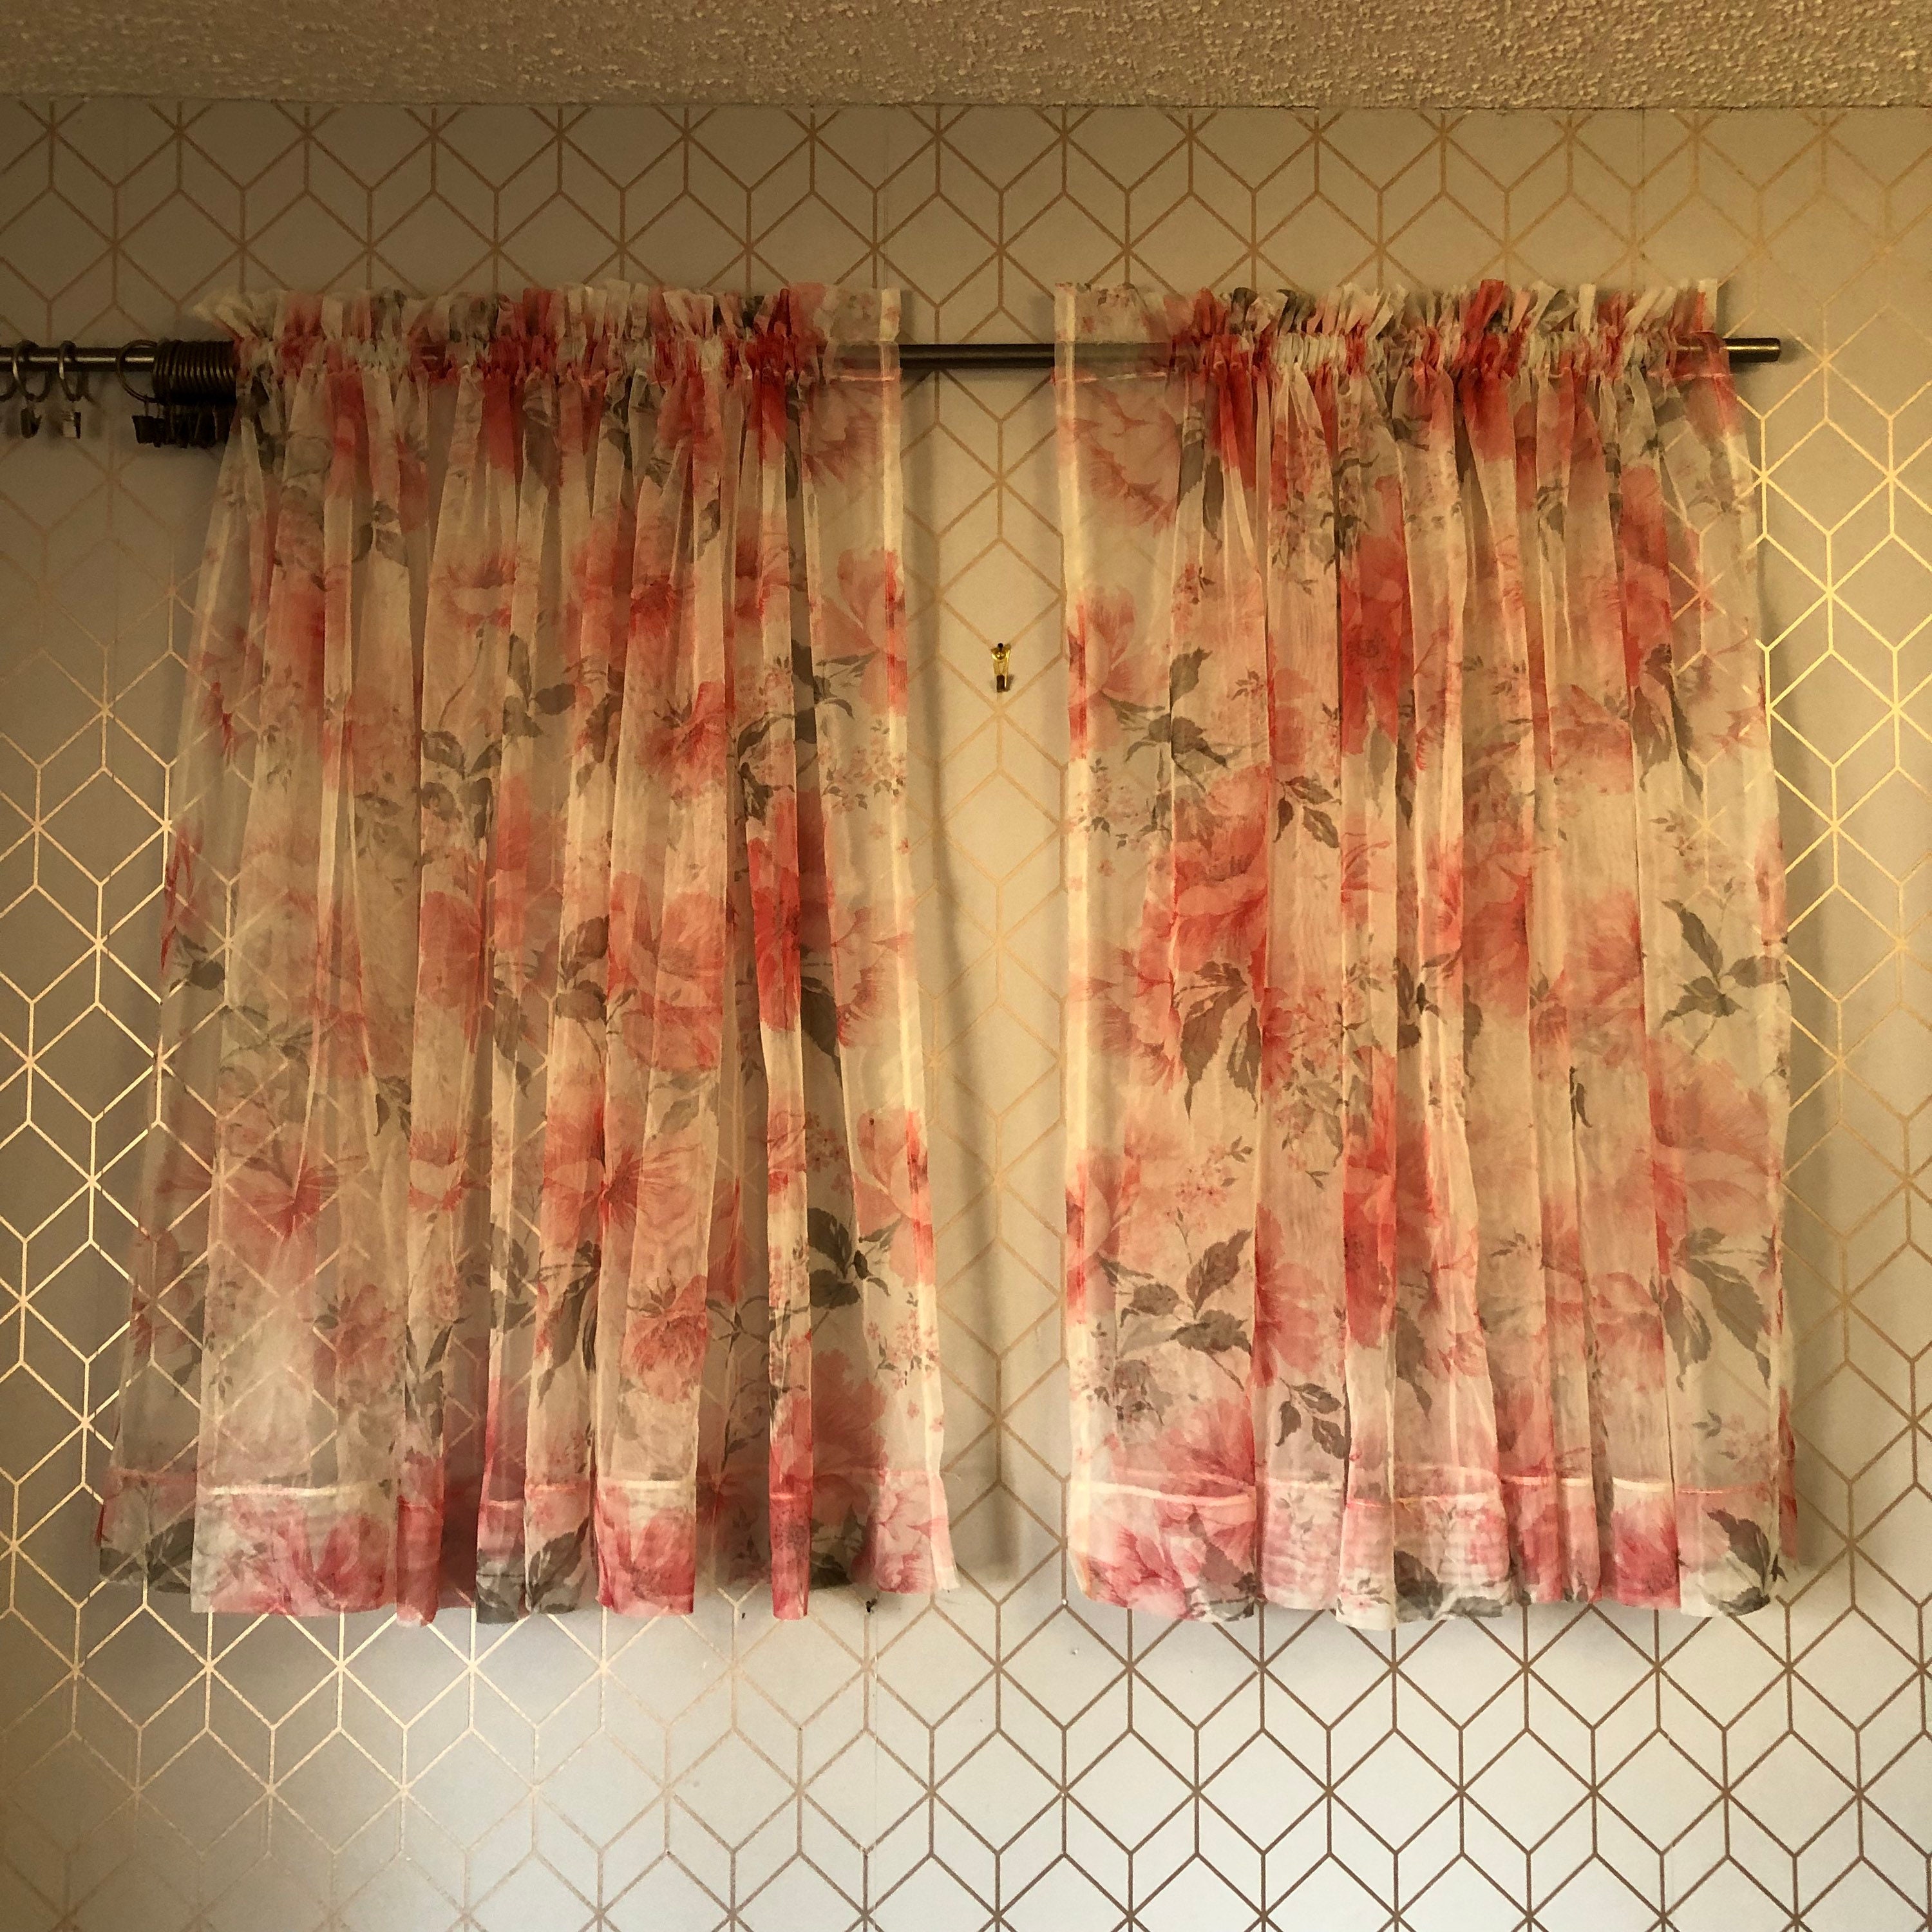 Pink Floral Window Curtains Nursery Drapes, Roses Flowers Girl